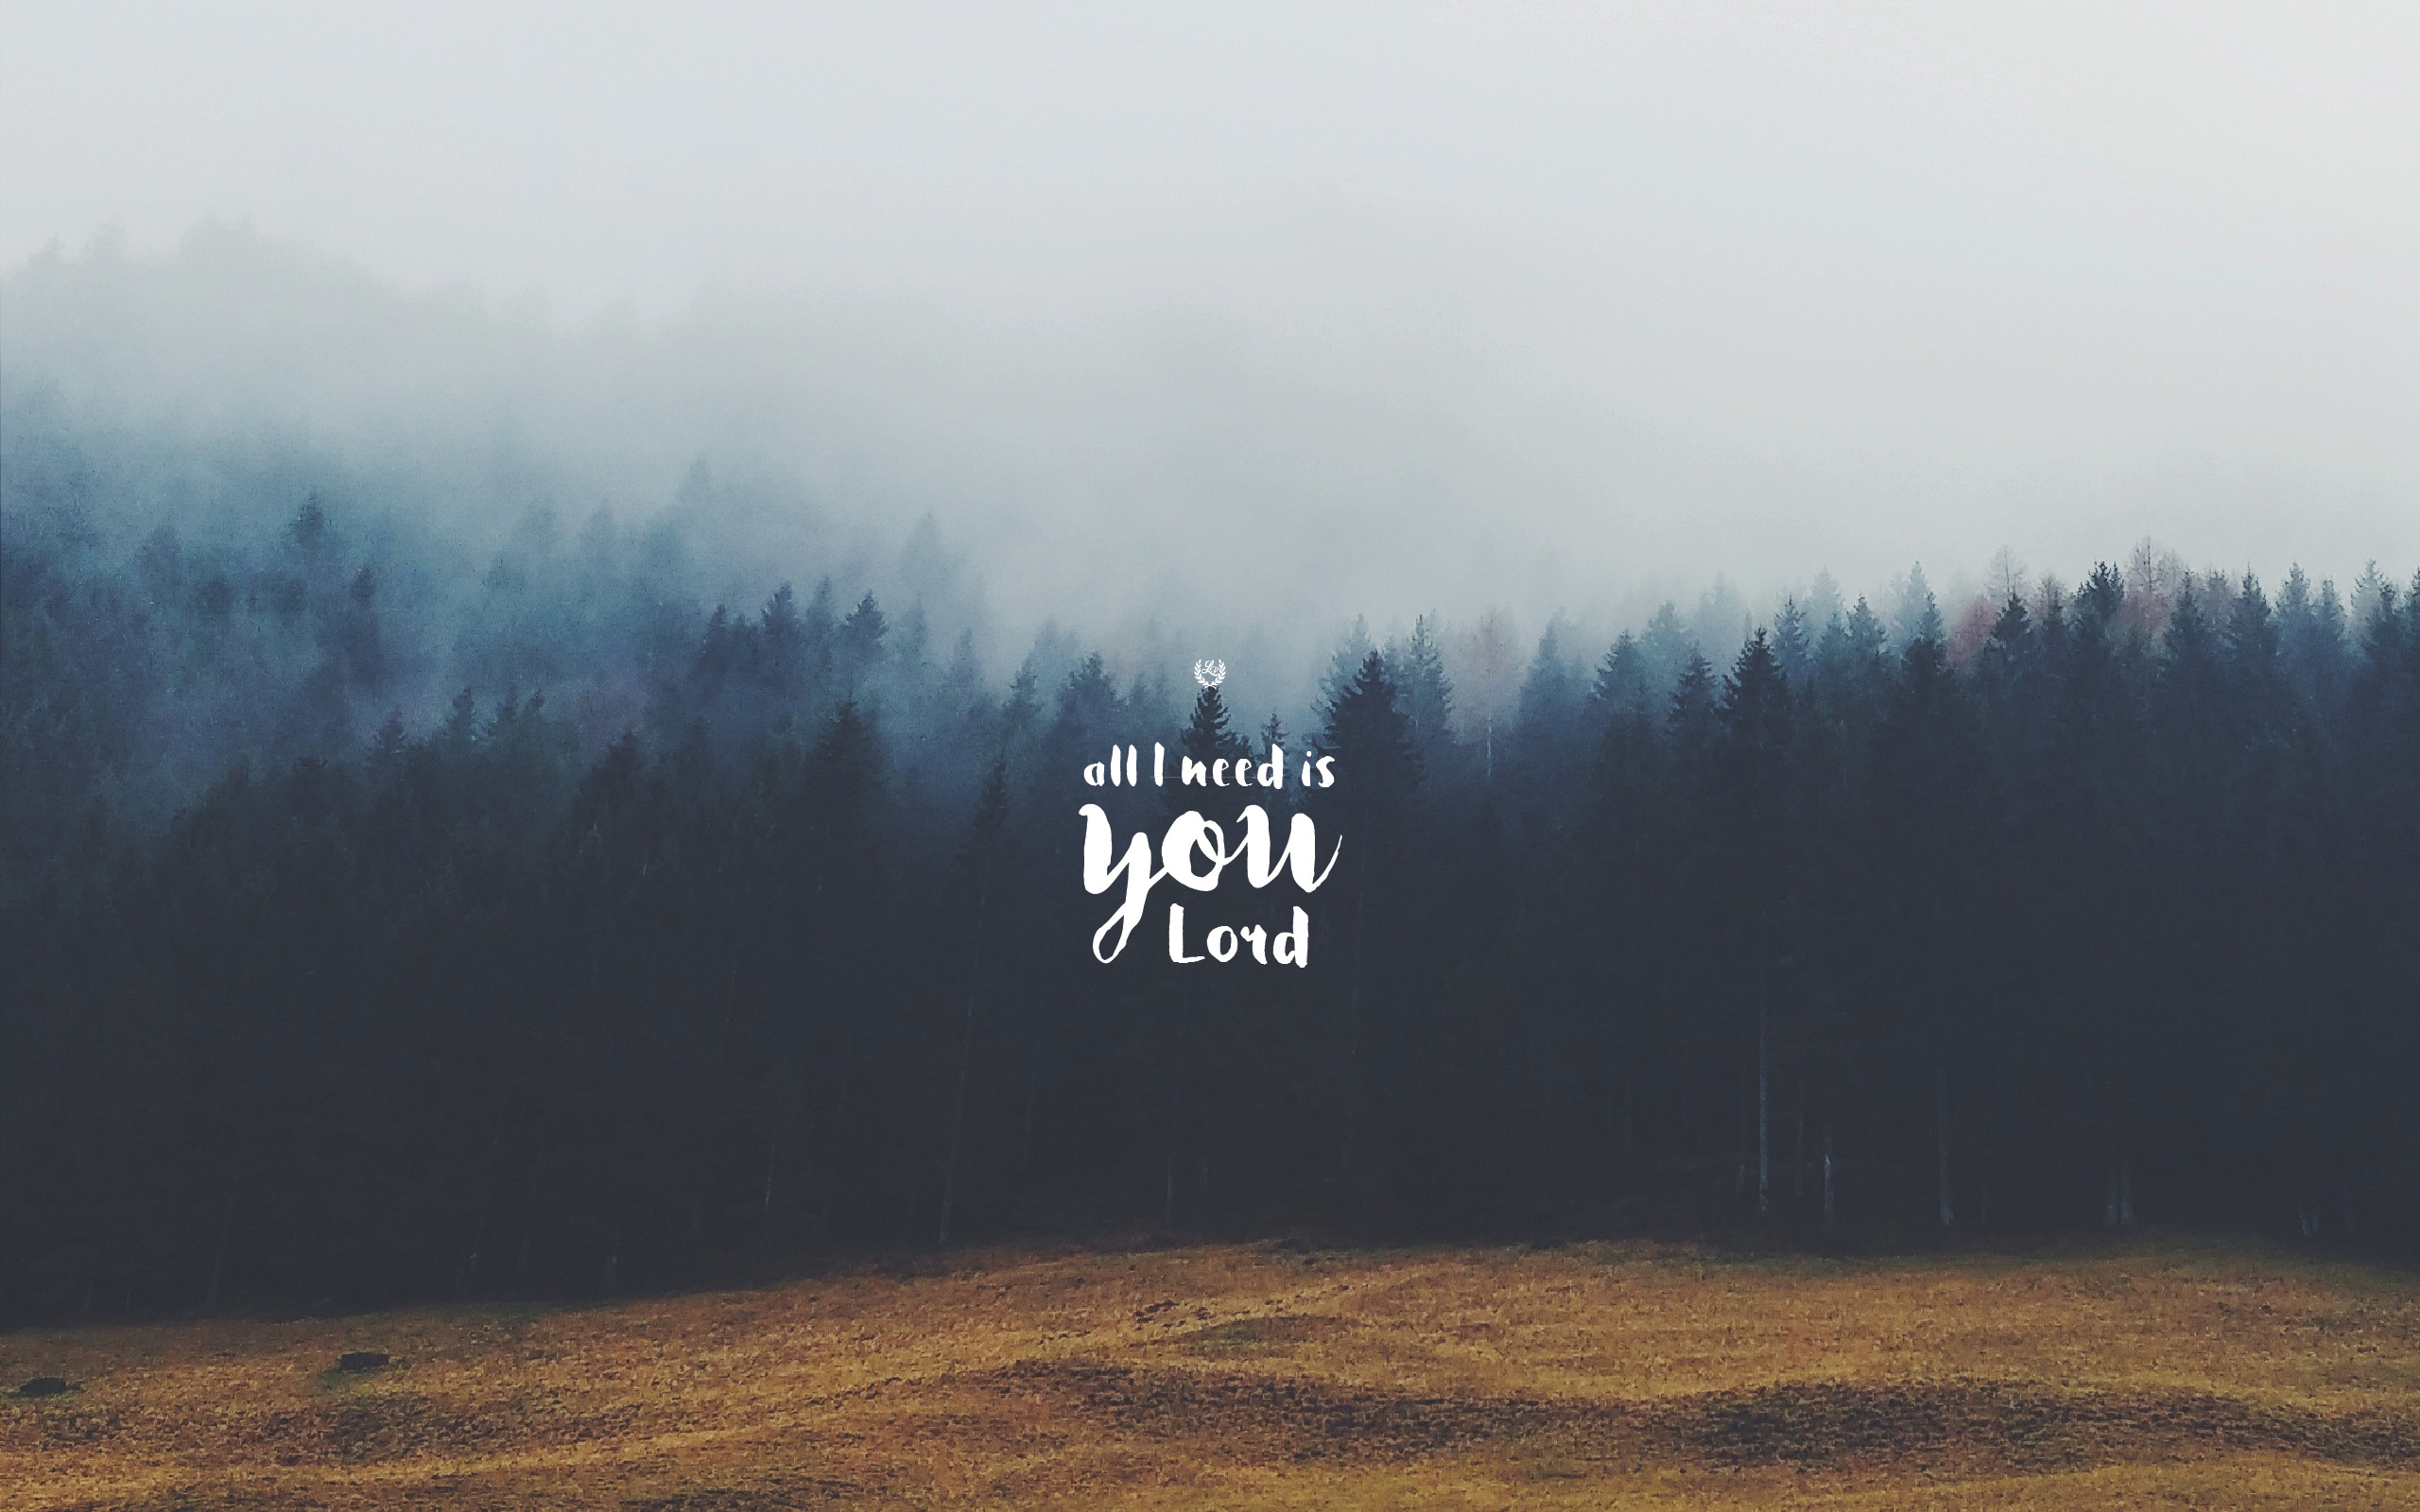 2560x1600 "All I Need is You" by Hillsong United // Laptop wallpaper format /